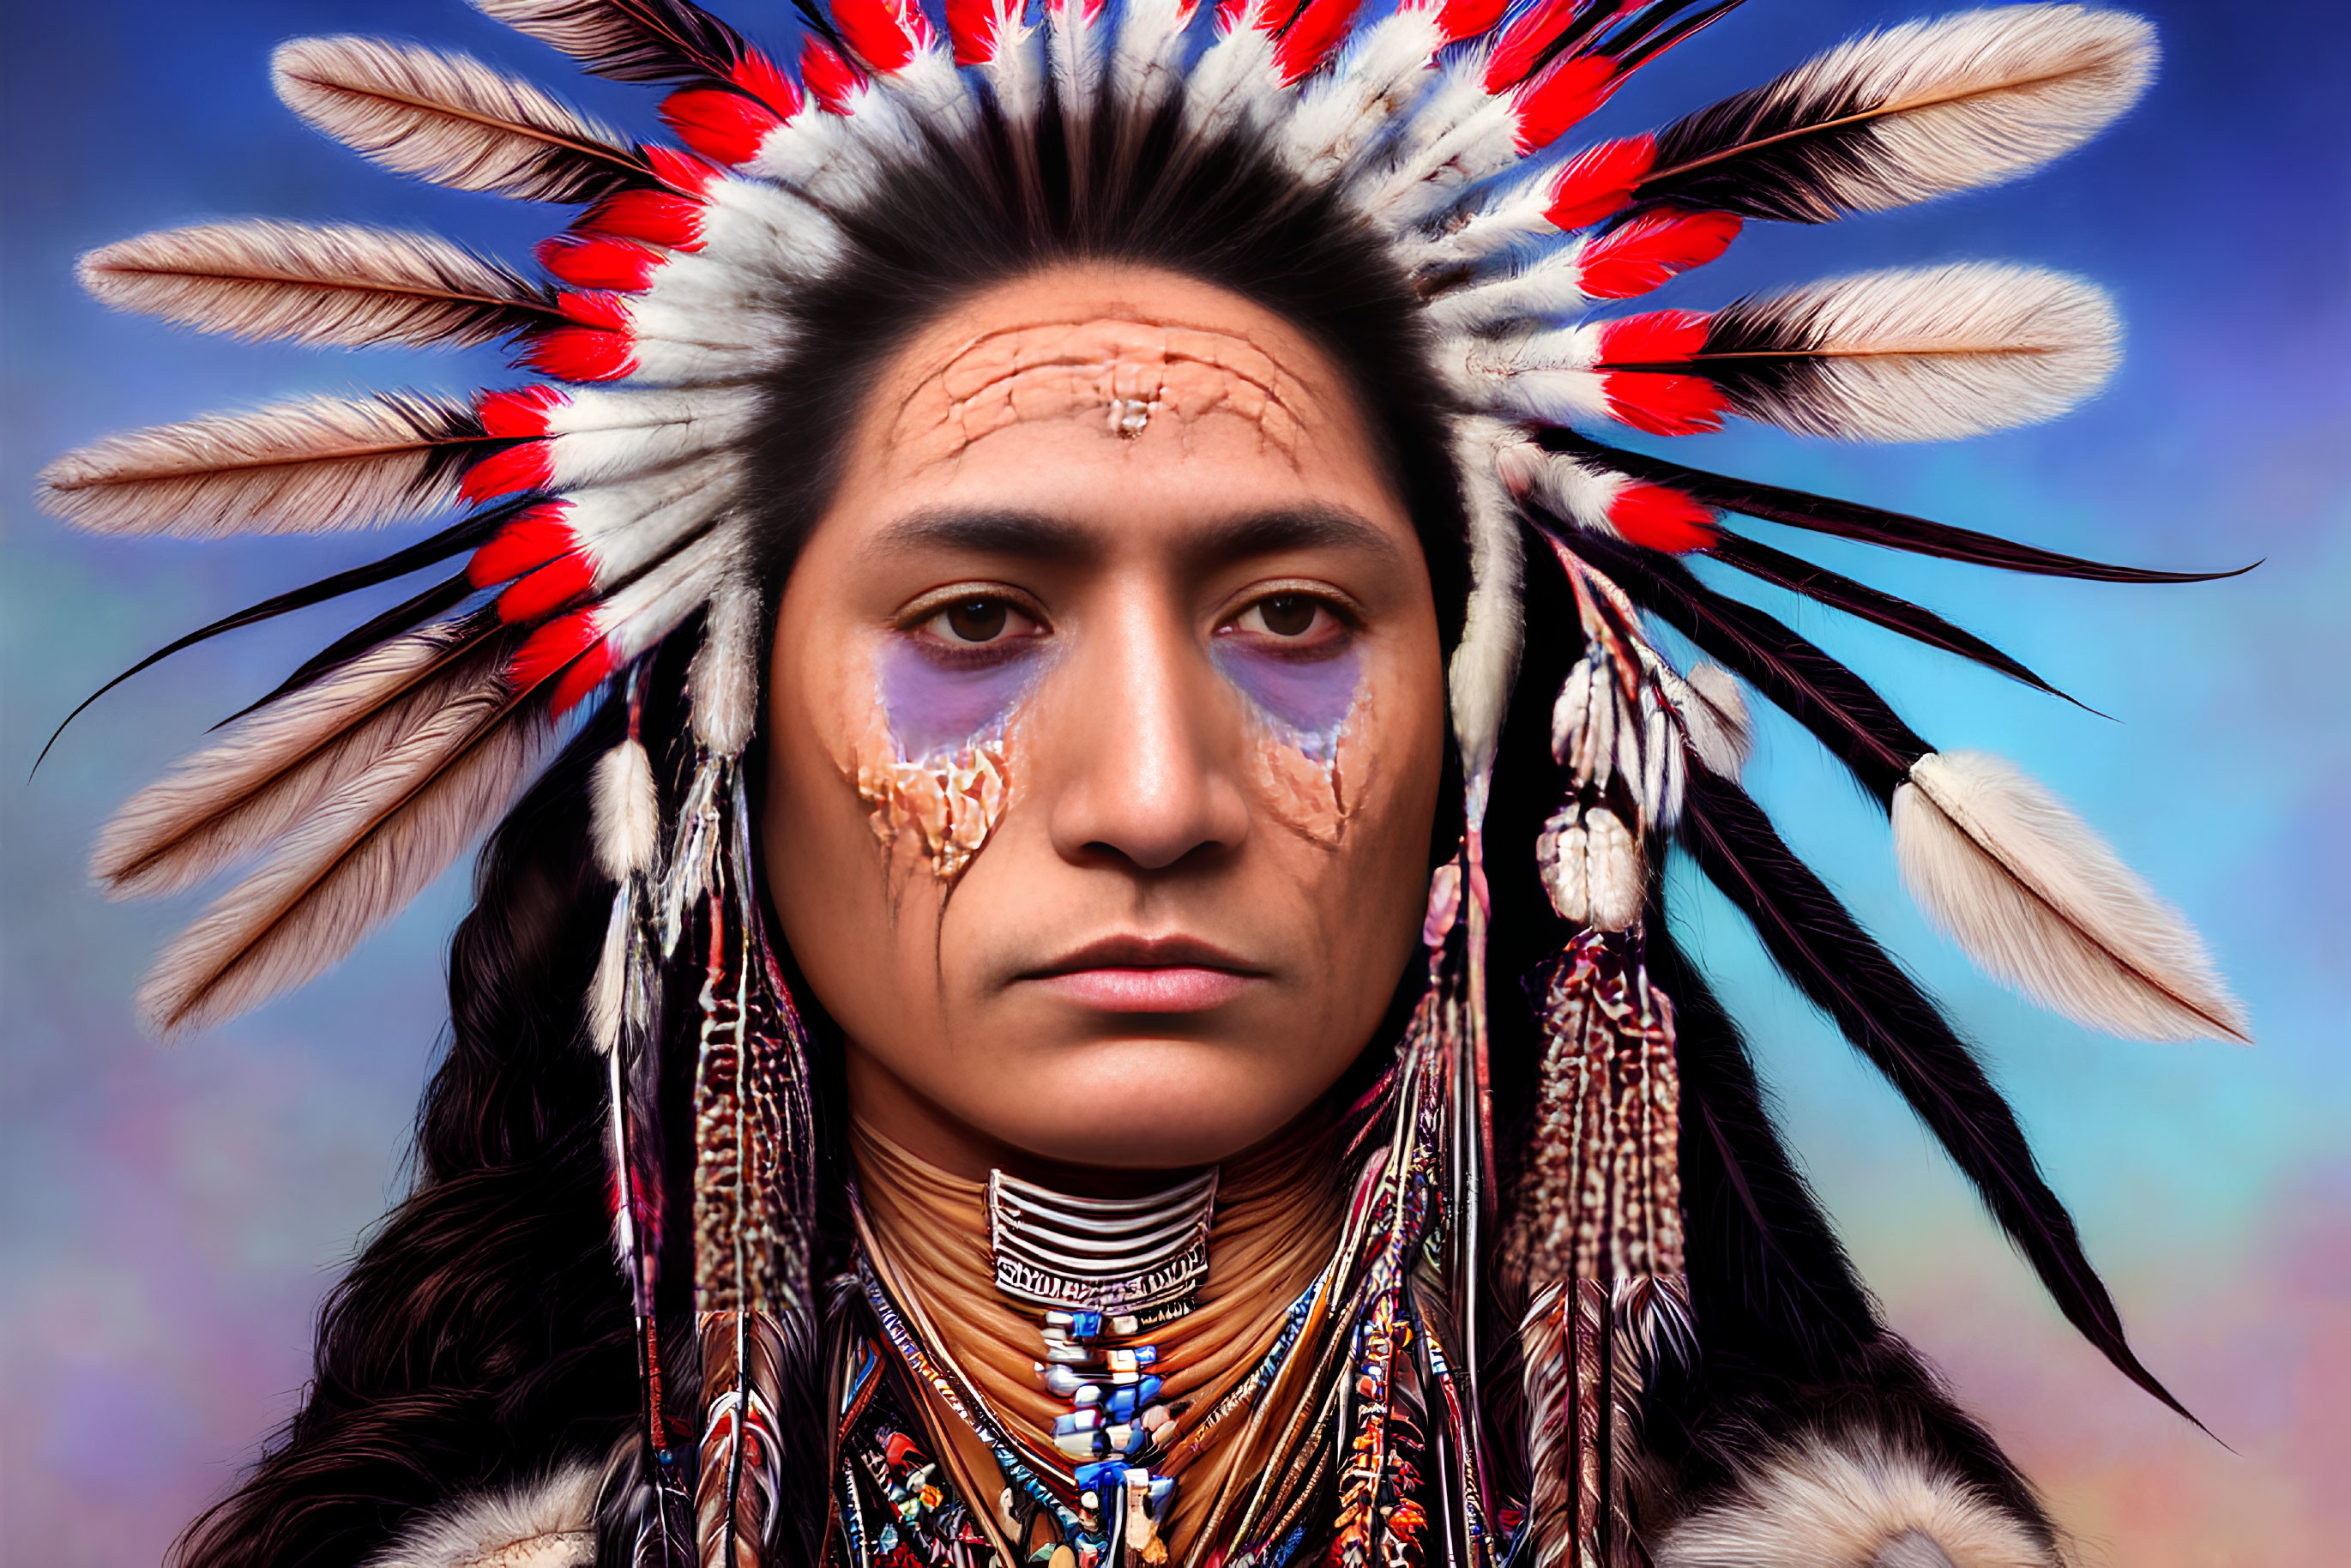 Traditional Native American headdress with feathers and face paint on person against colorful backdrop